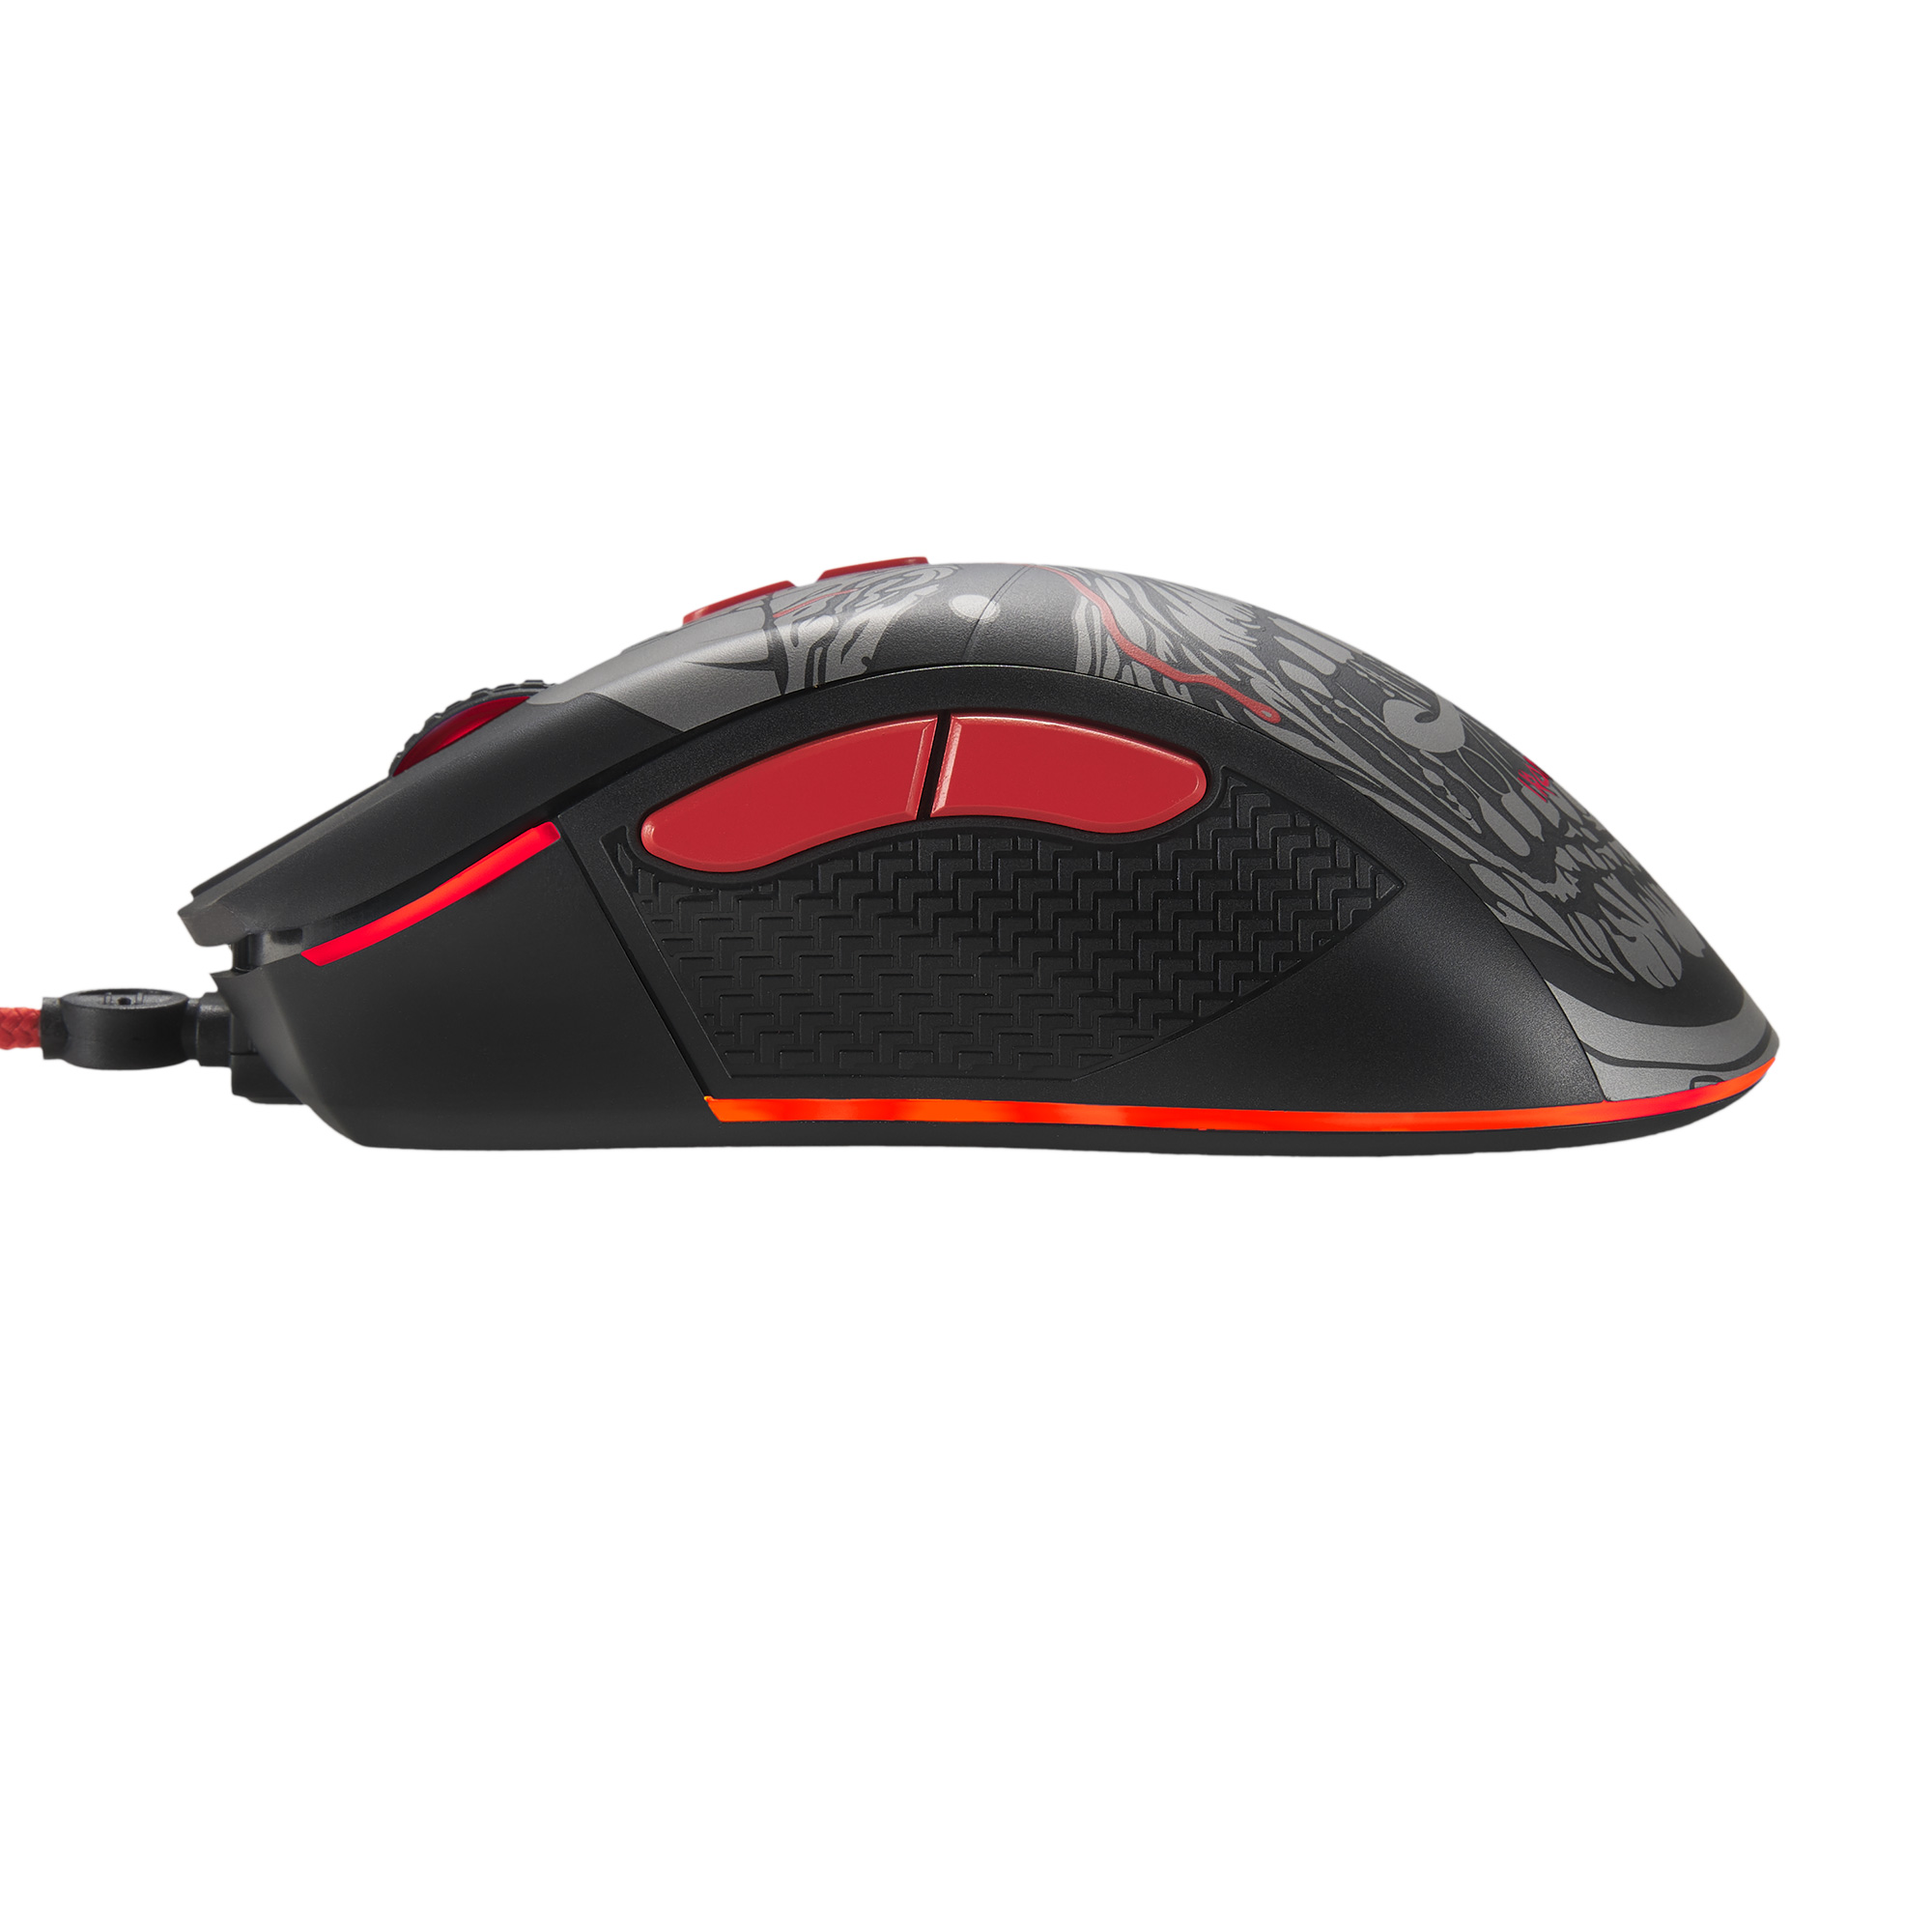 Souris gaming Iron Maiden | Subsonic